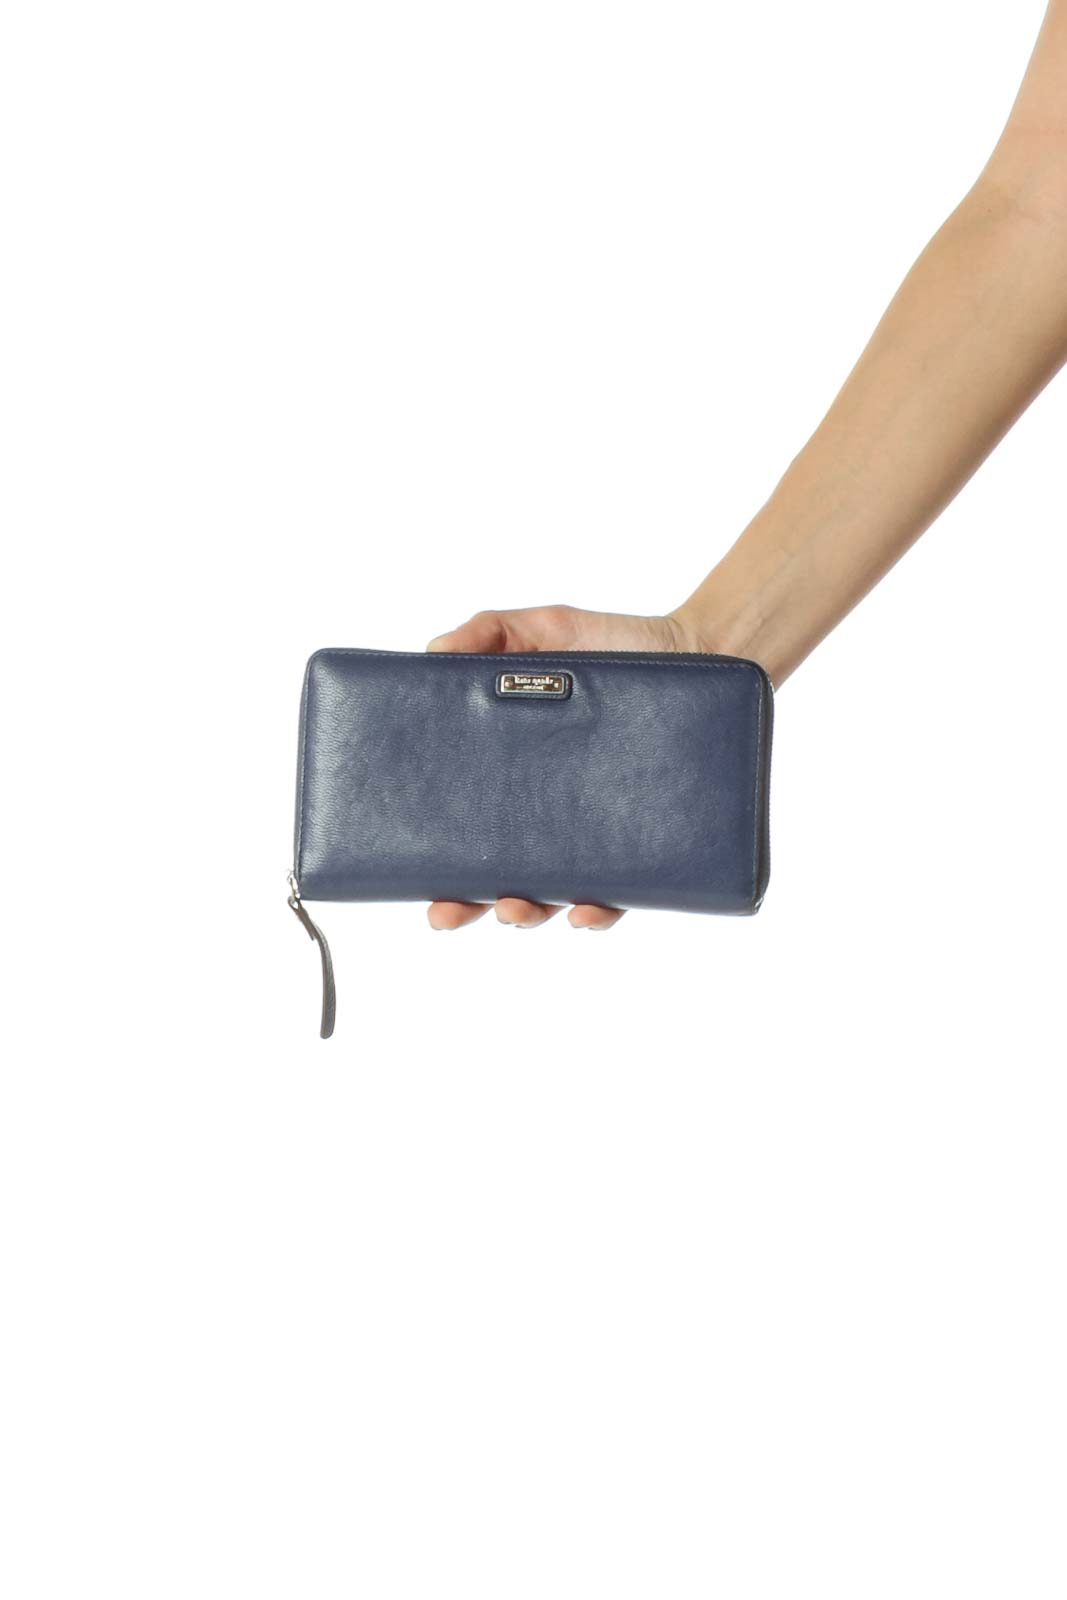 Blue Slim Wallet with Gold Zipper Front